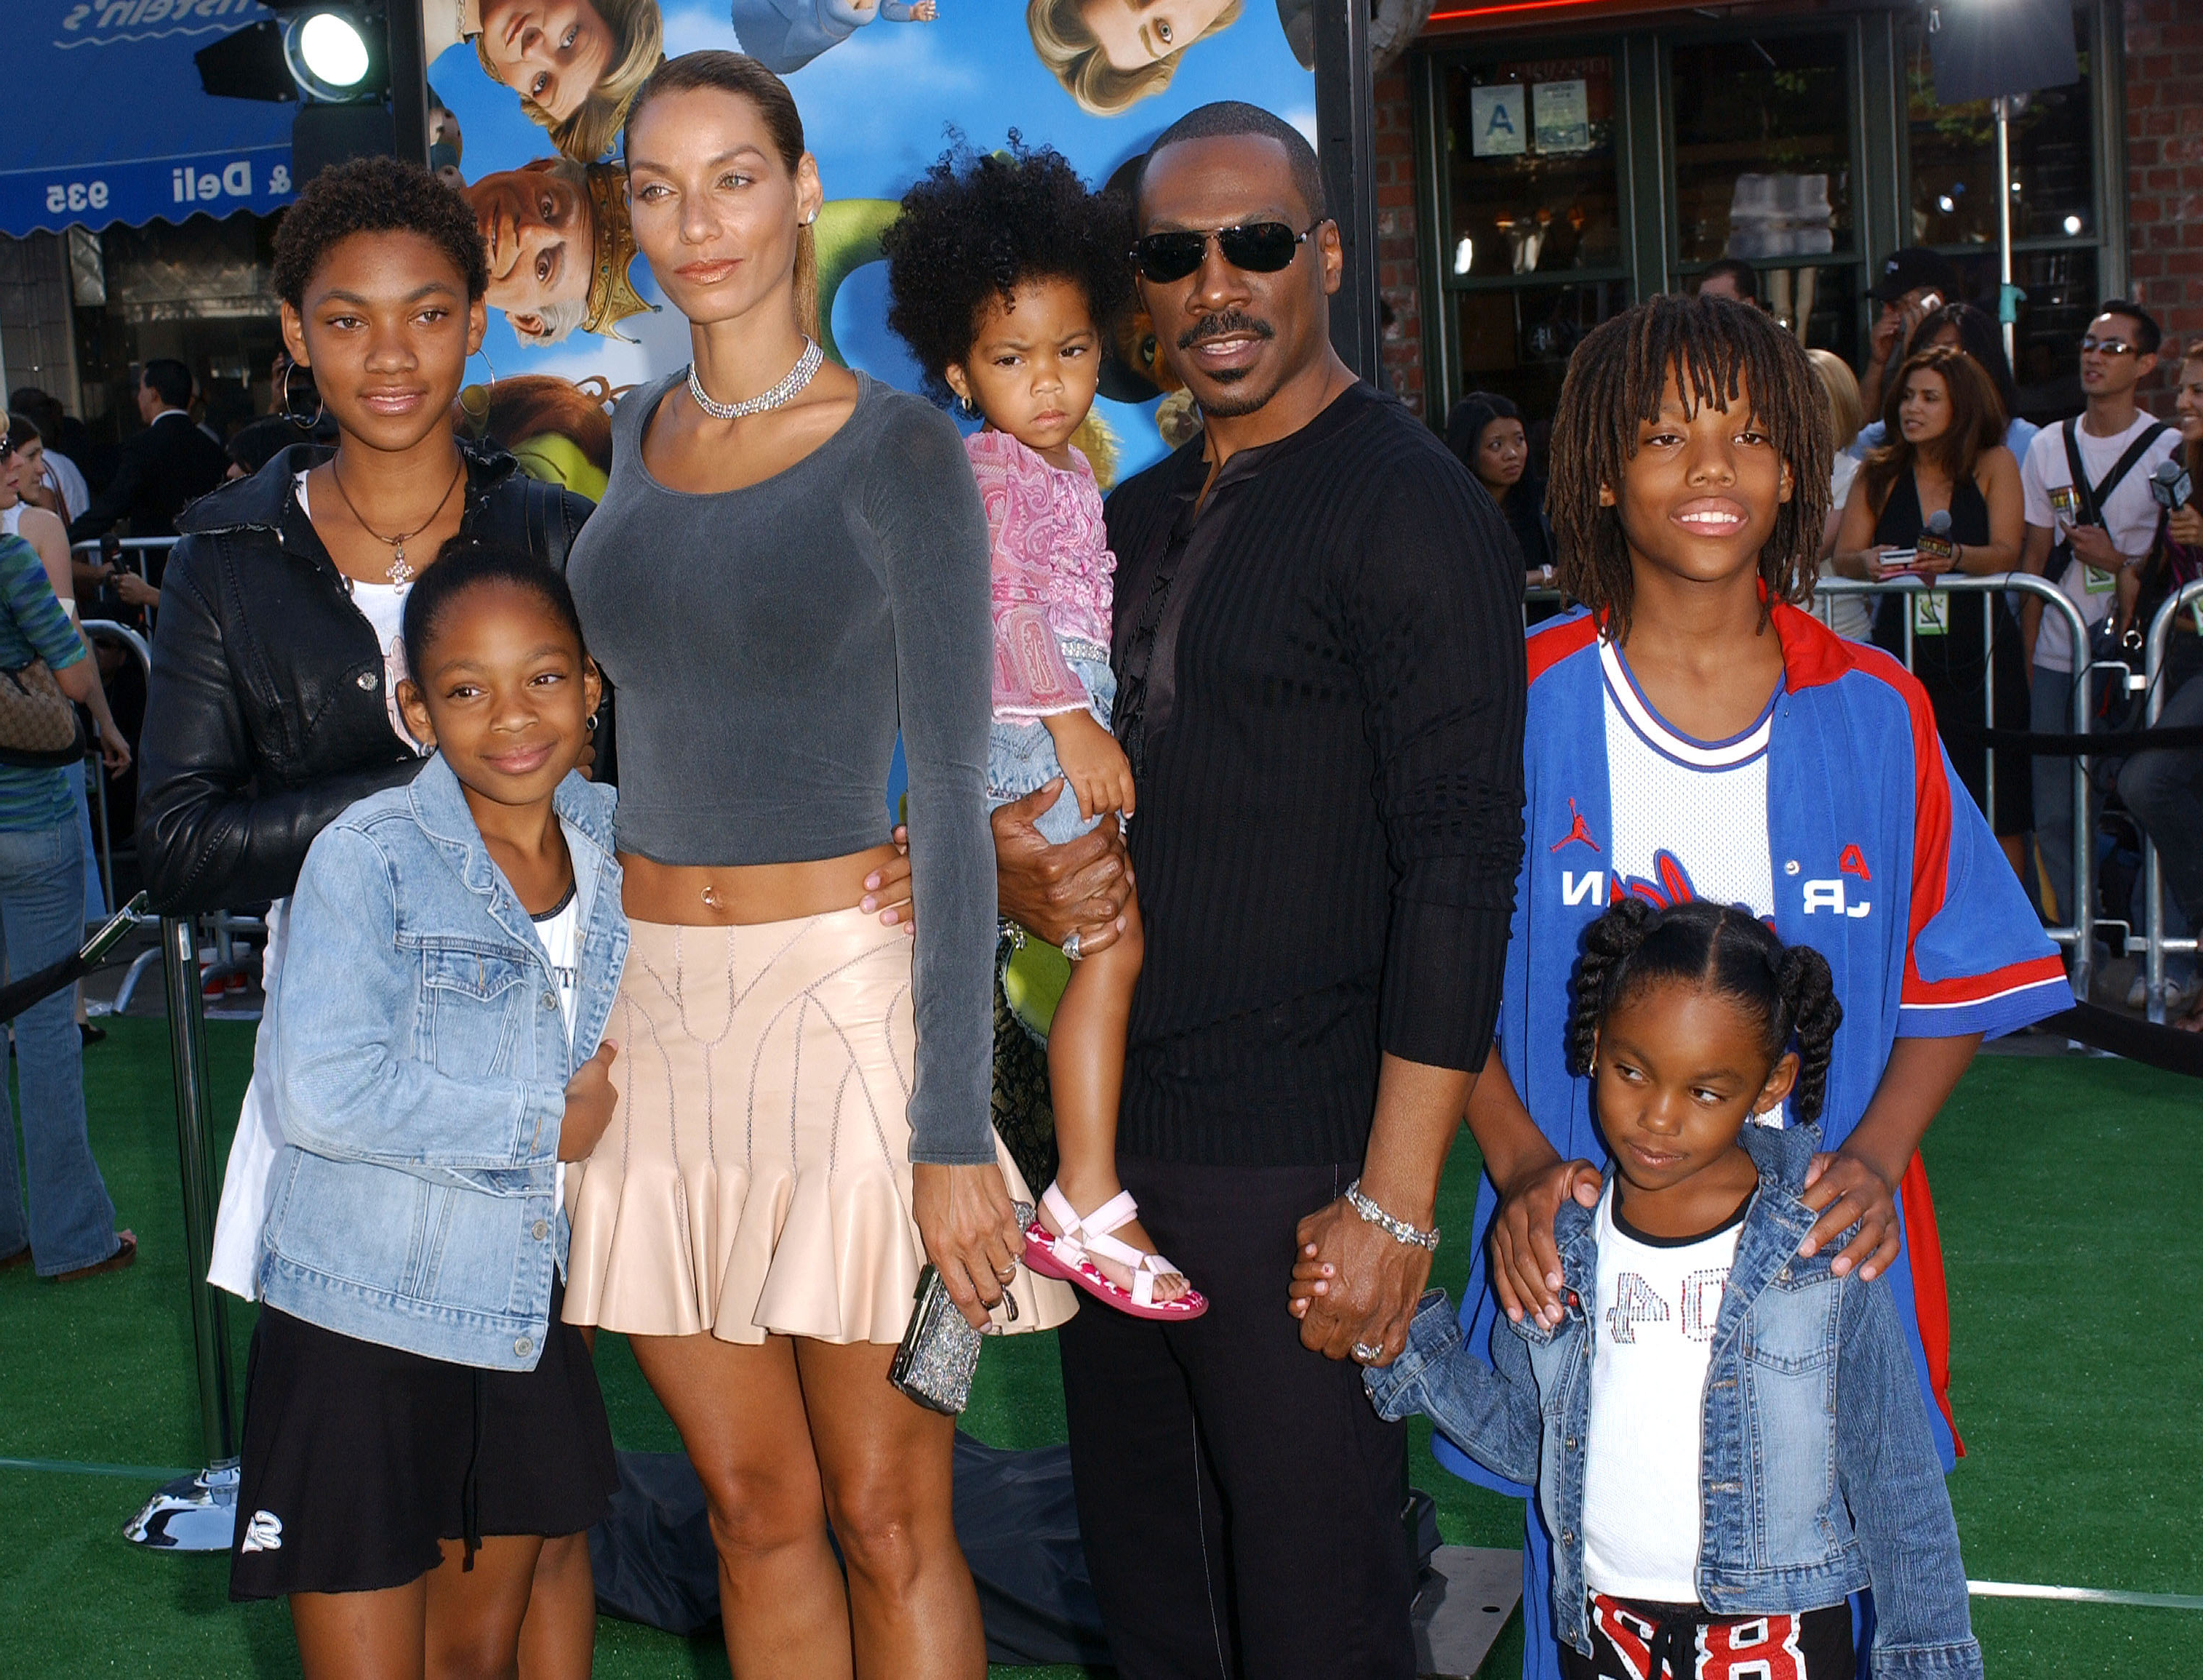 Nick Cannon And 16 Other6 -Nick Cannon And 16 Other Famous People Who Have A Bunch Of Children